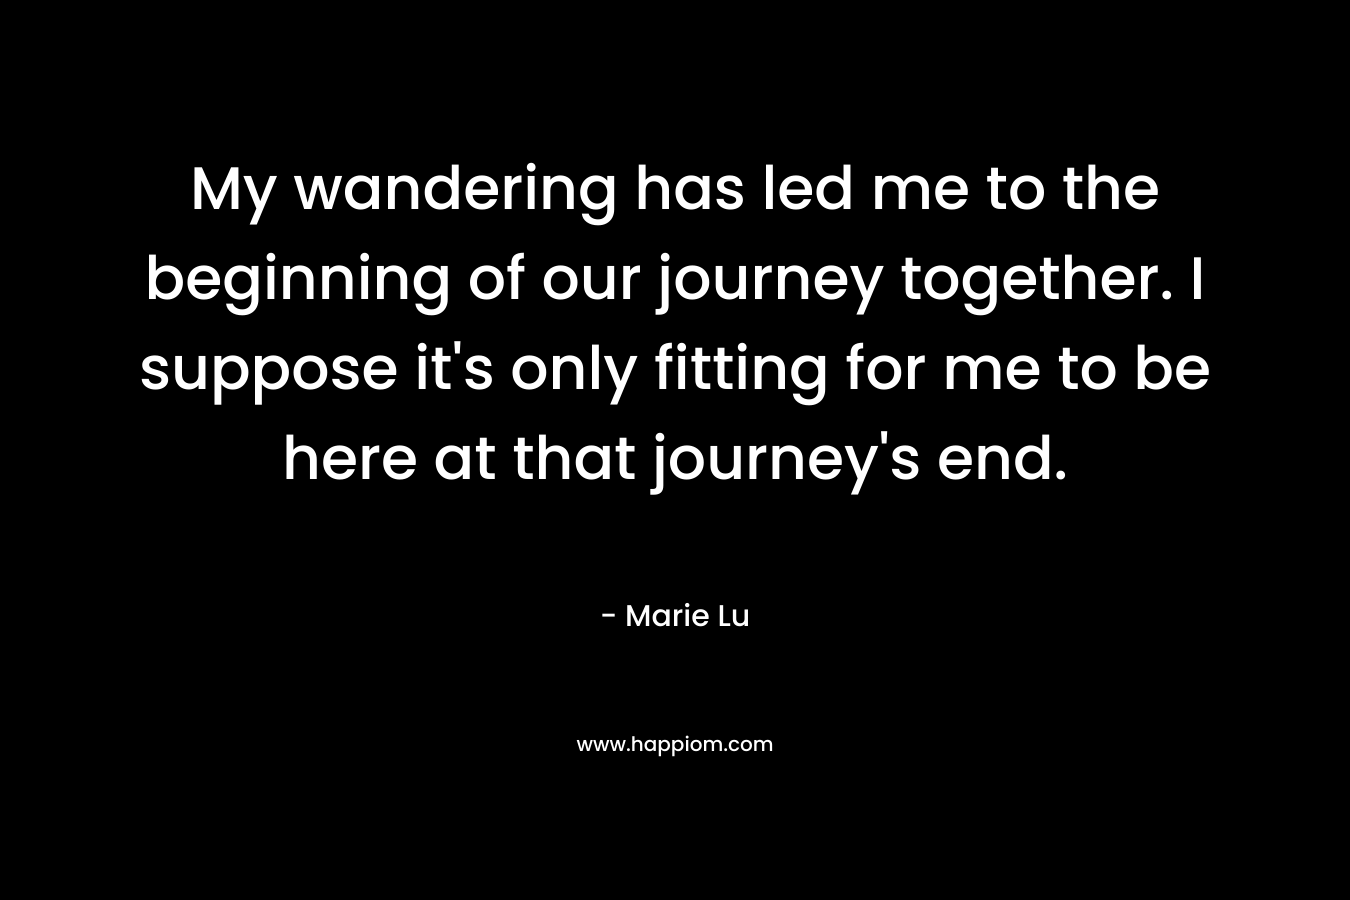 My wandering has led me to the beginning of our journey together. I suppose it's only fitting for me to be here at that journey's end.